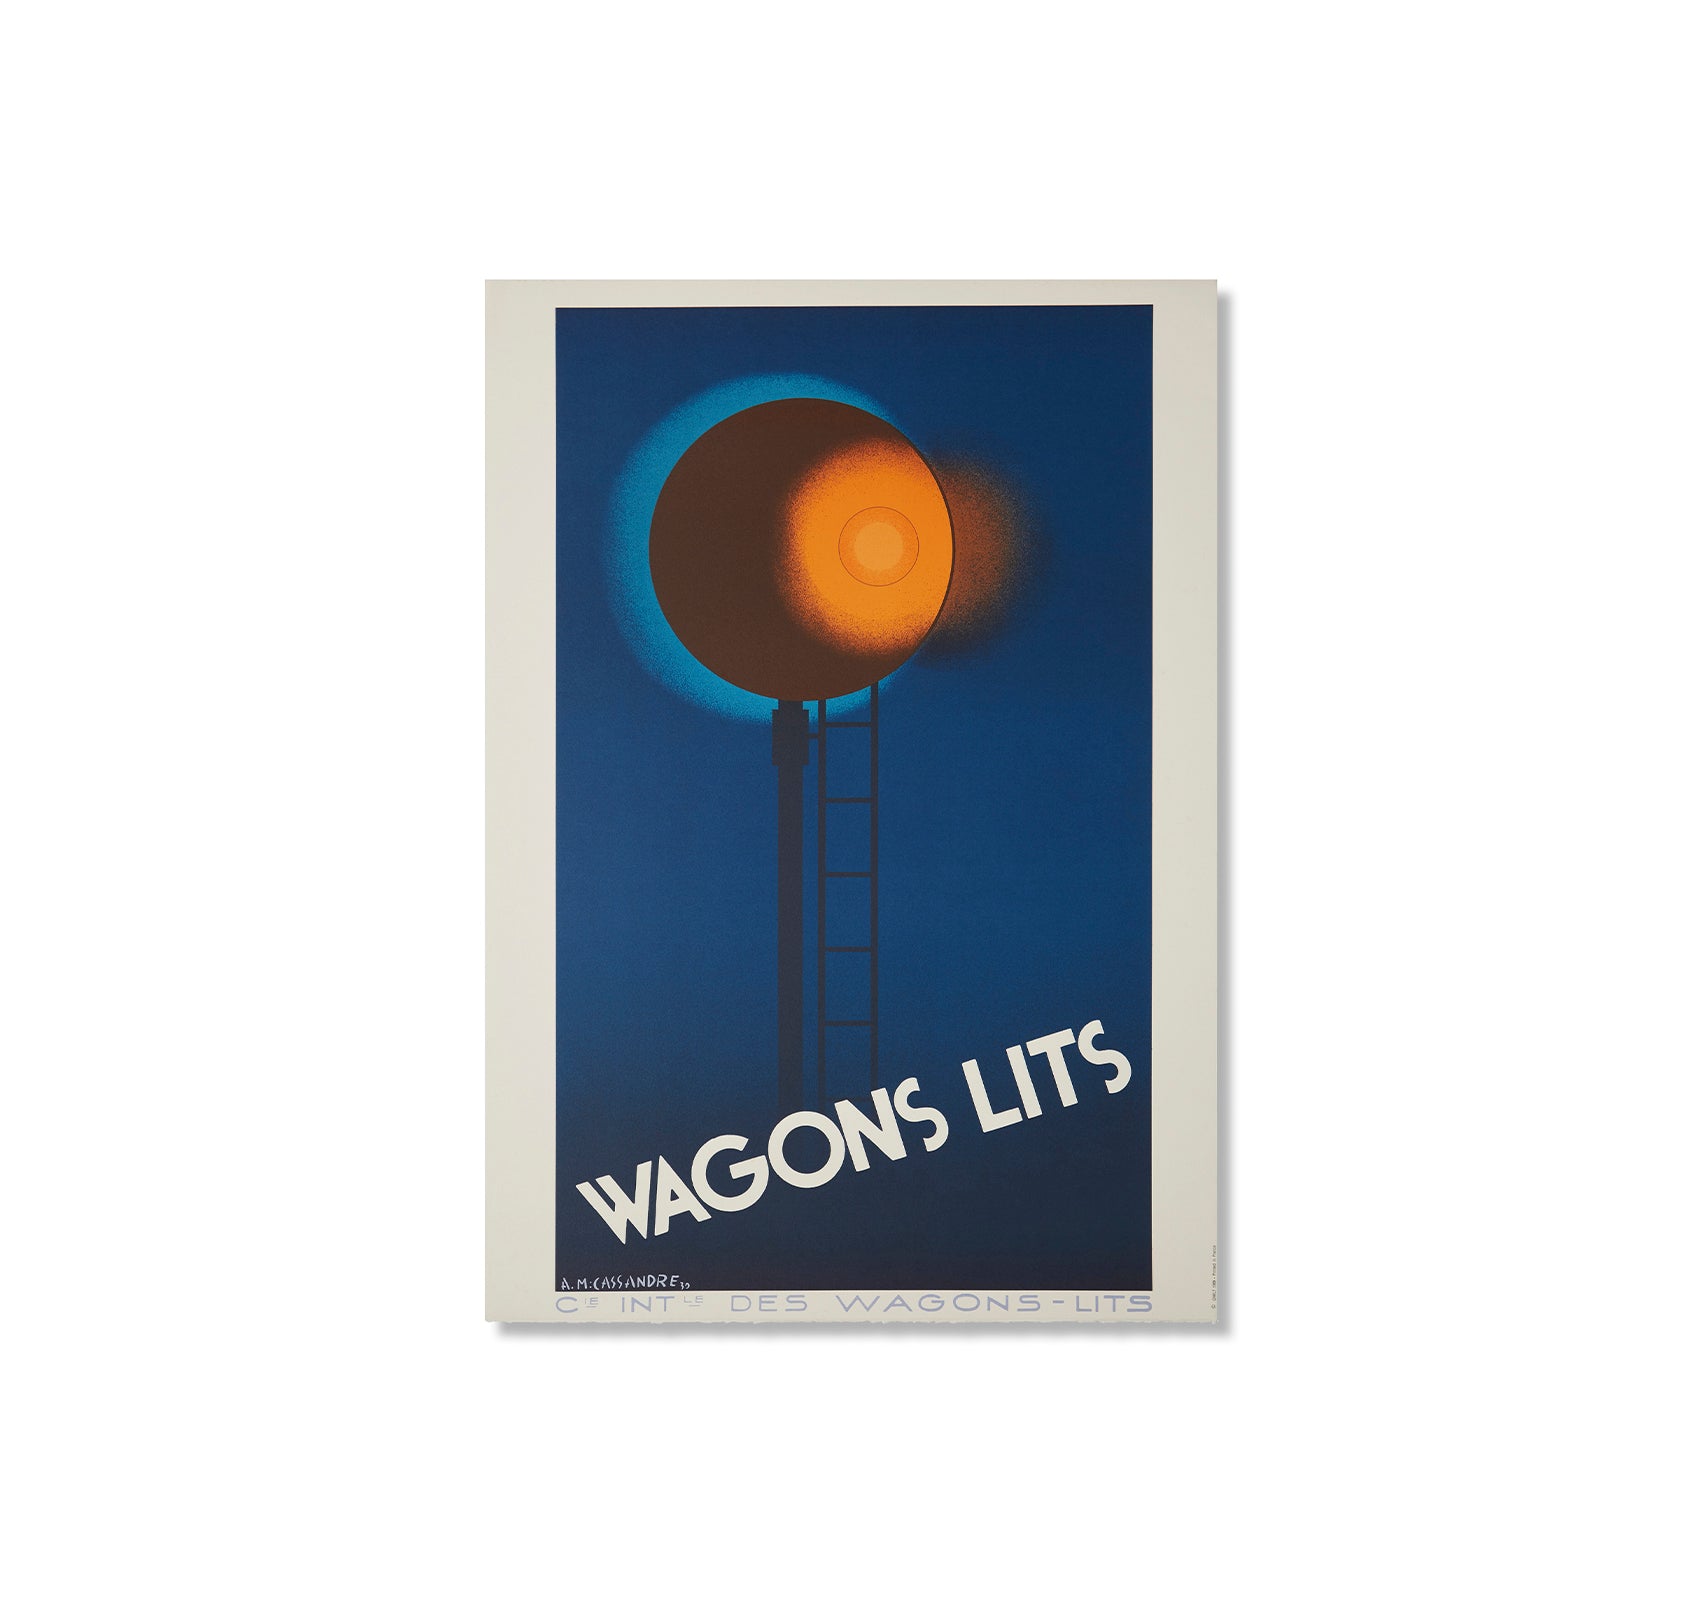 WAGONS-LITZ 'WAGONS LITS' POSTER by A. M. Cassandre [REPRODUCED EDITION]